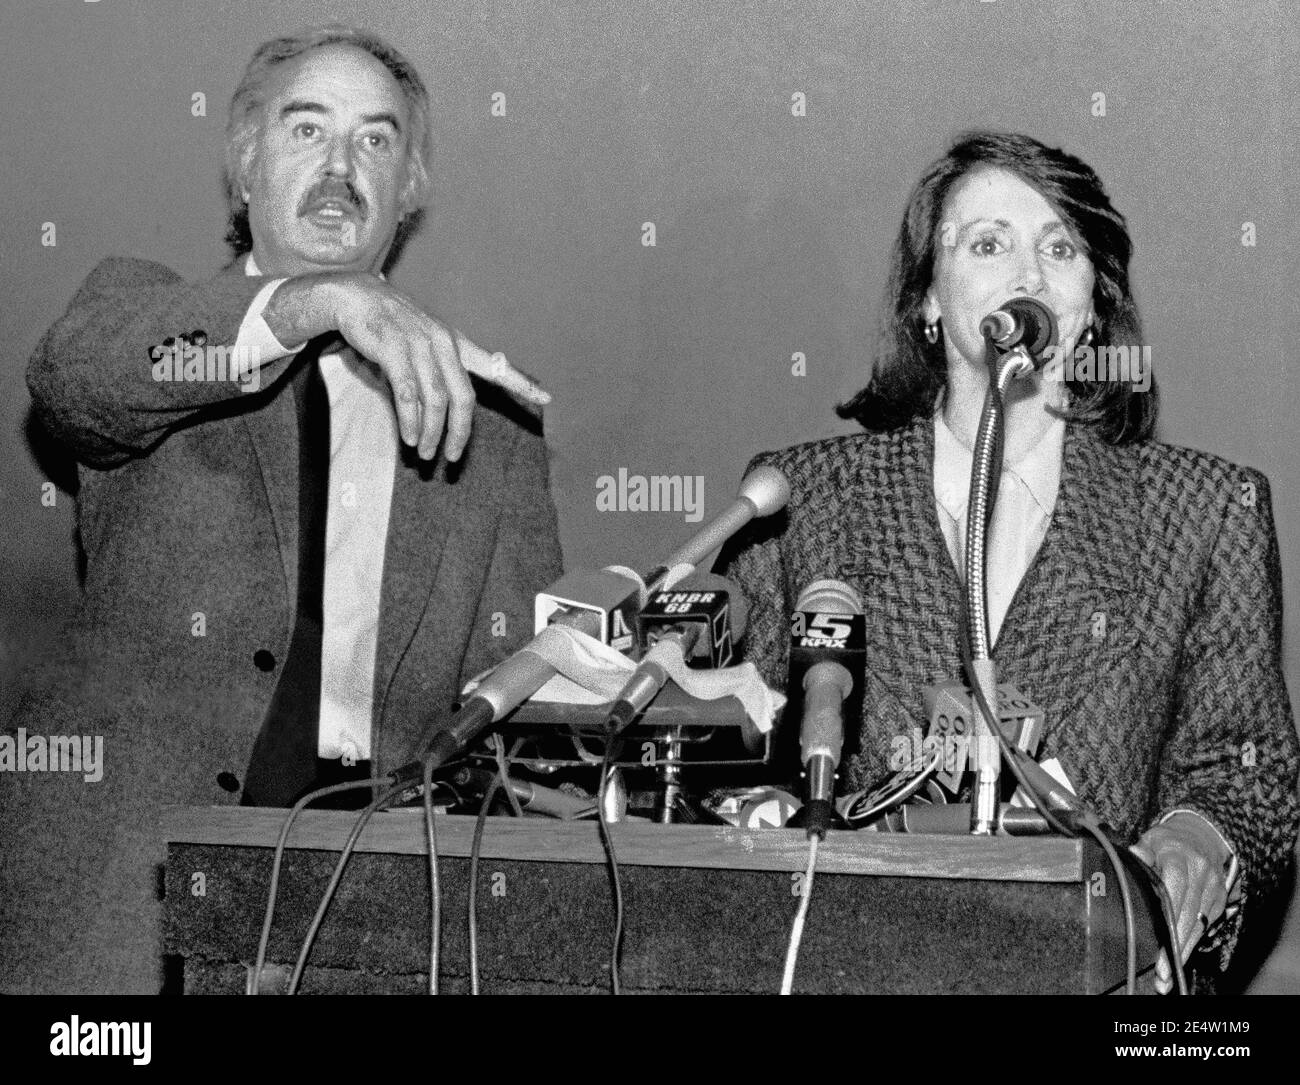 John Burton suports Nancy Pelosi for the Democratic party candidate for a seat in the US House of representatives. 1987 Stock Photo